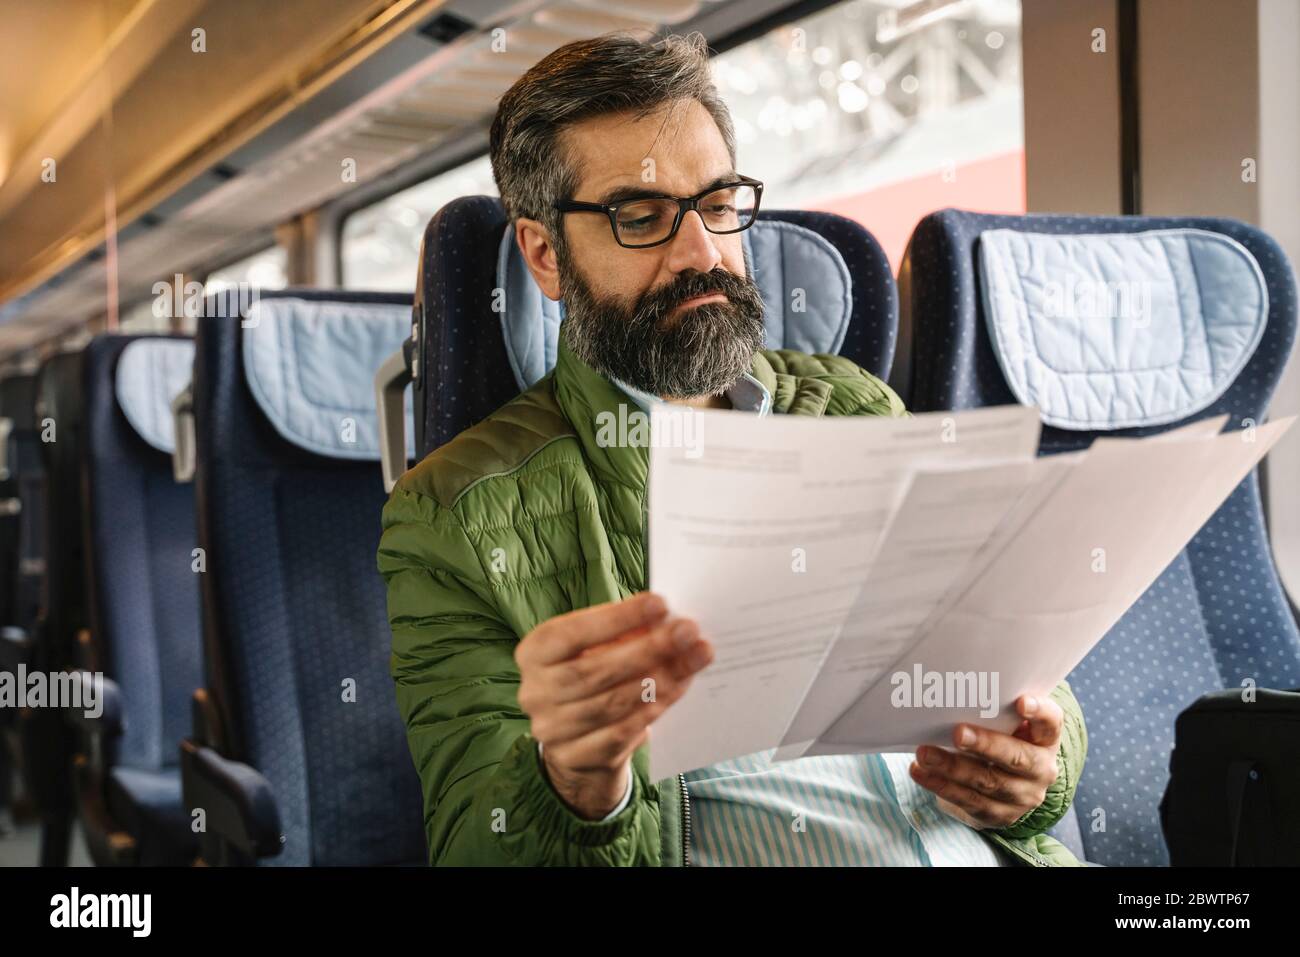 Man sitting in train reading documents Stock Photo